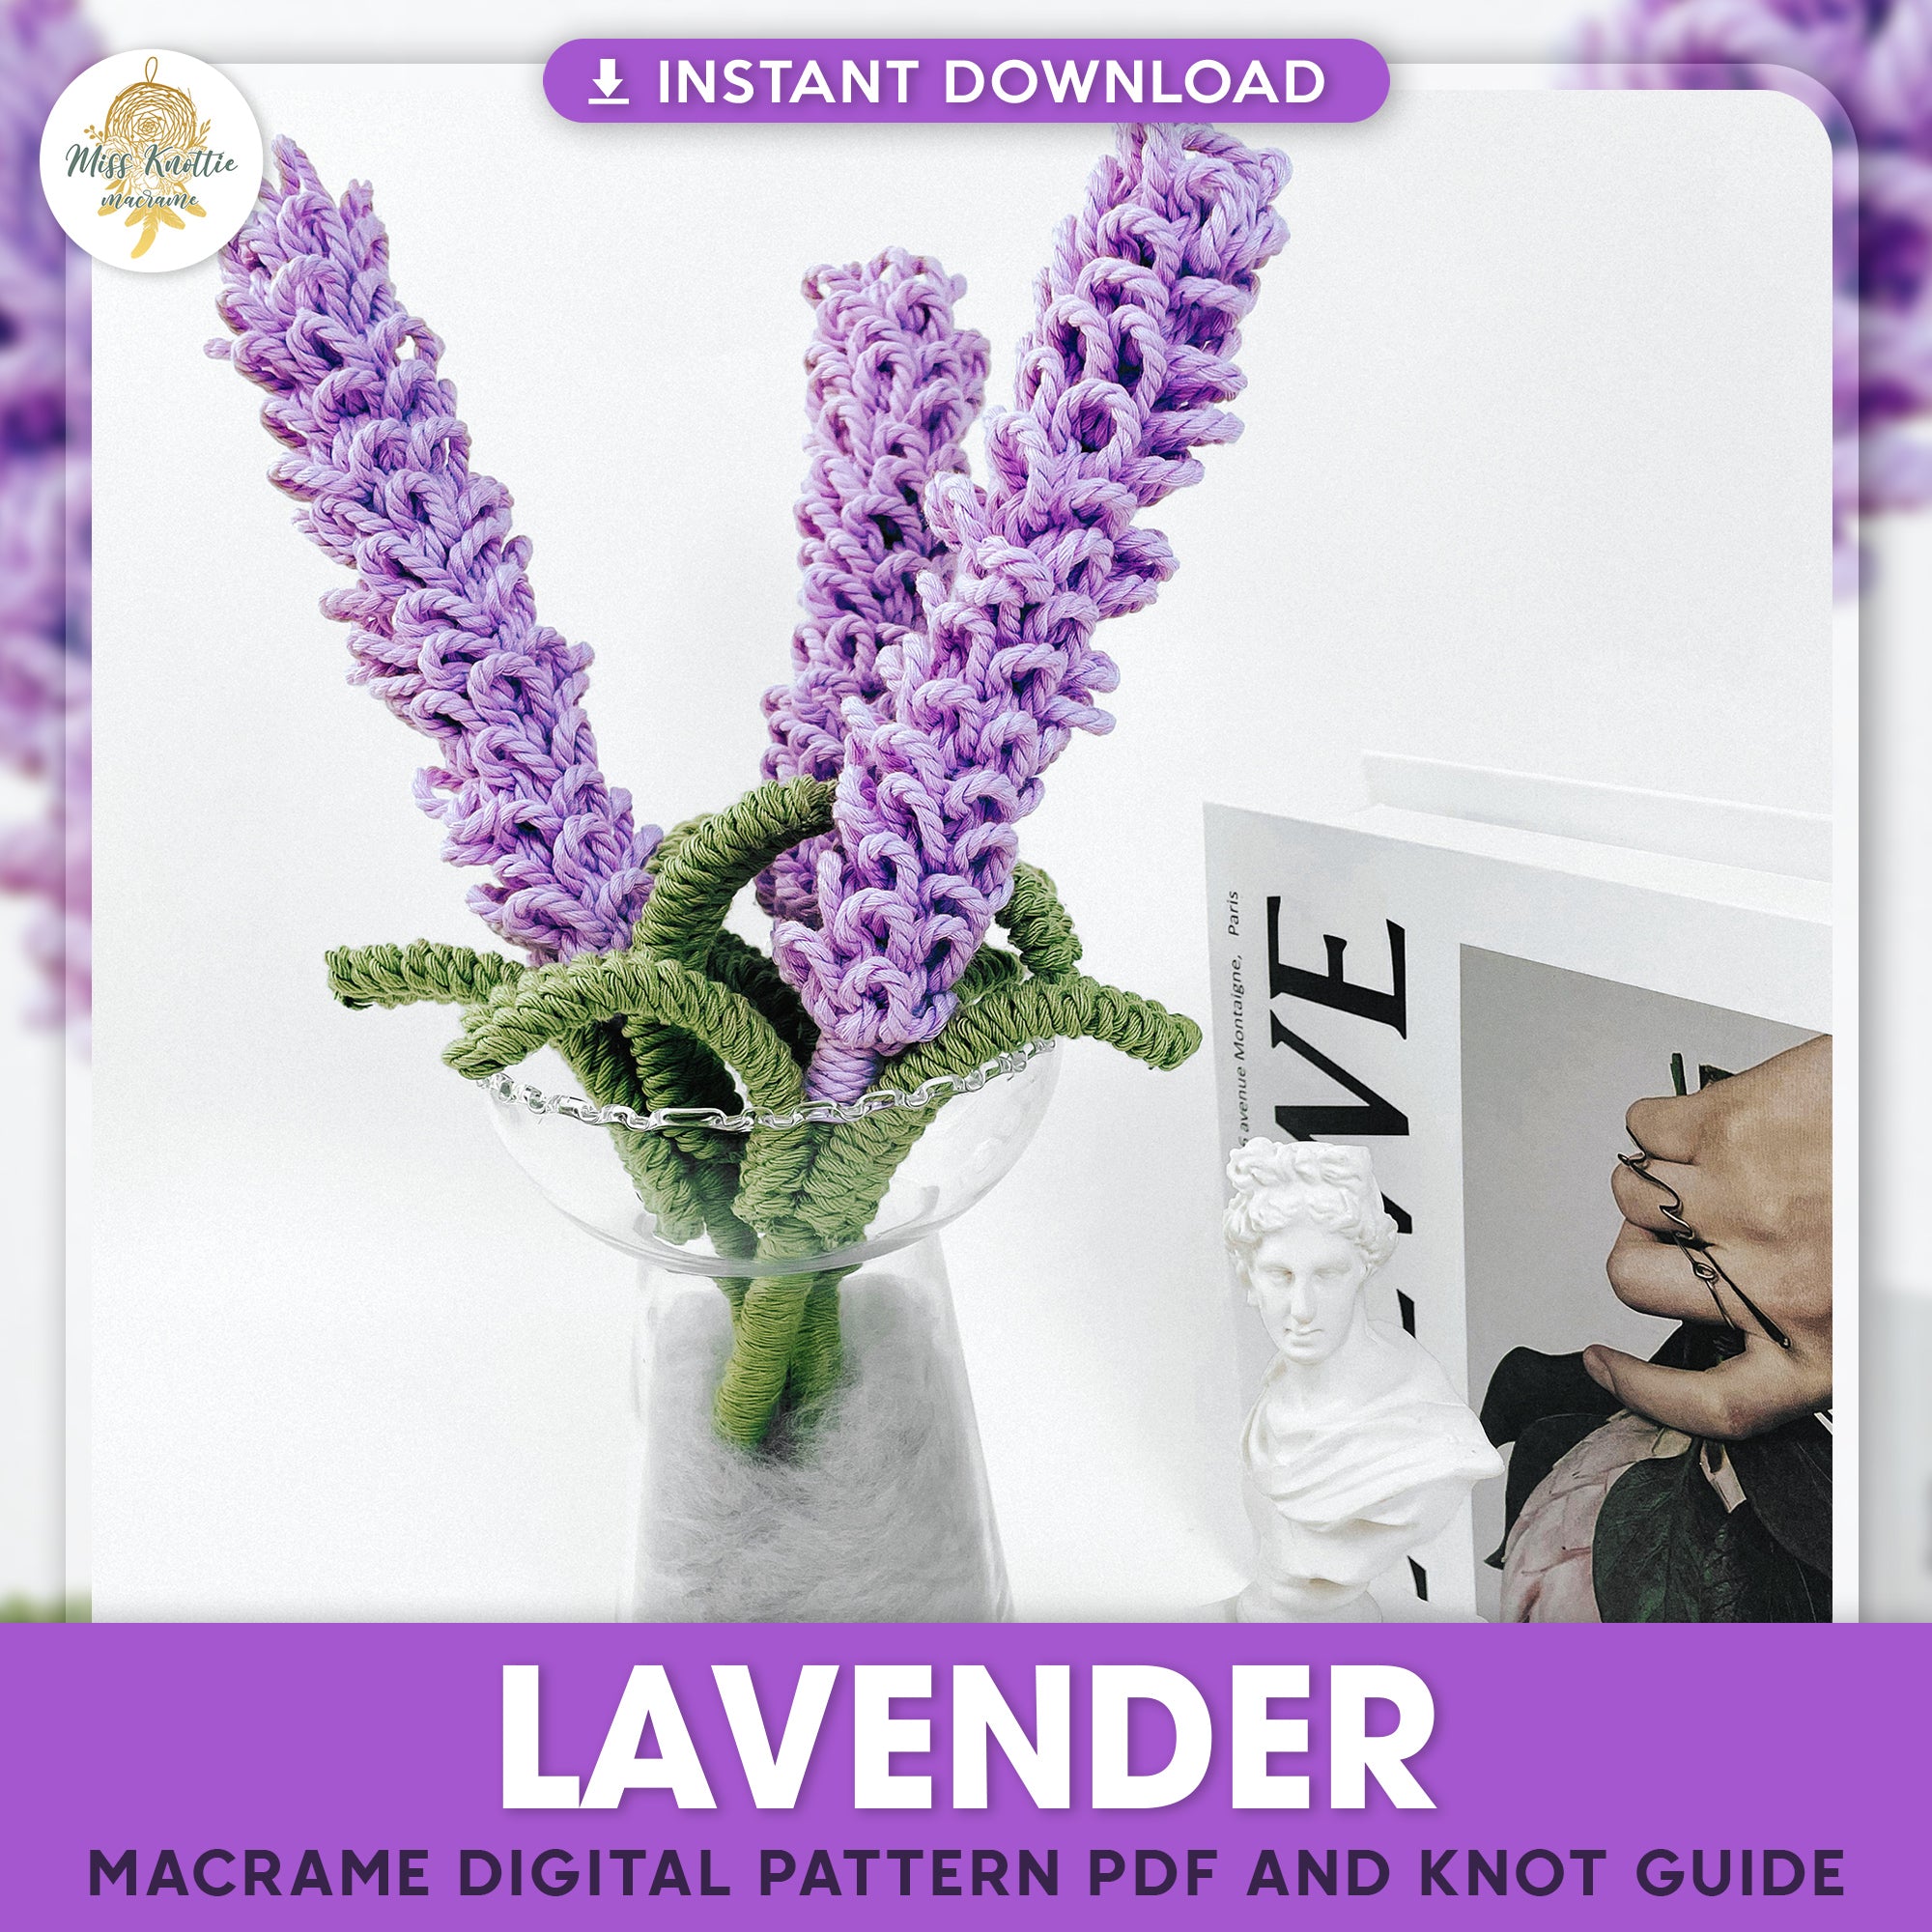 Lavender Pattern - Digital PDF and Knot Guide